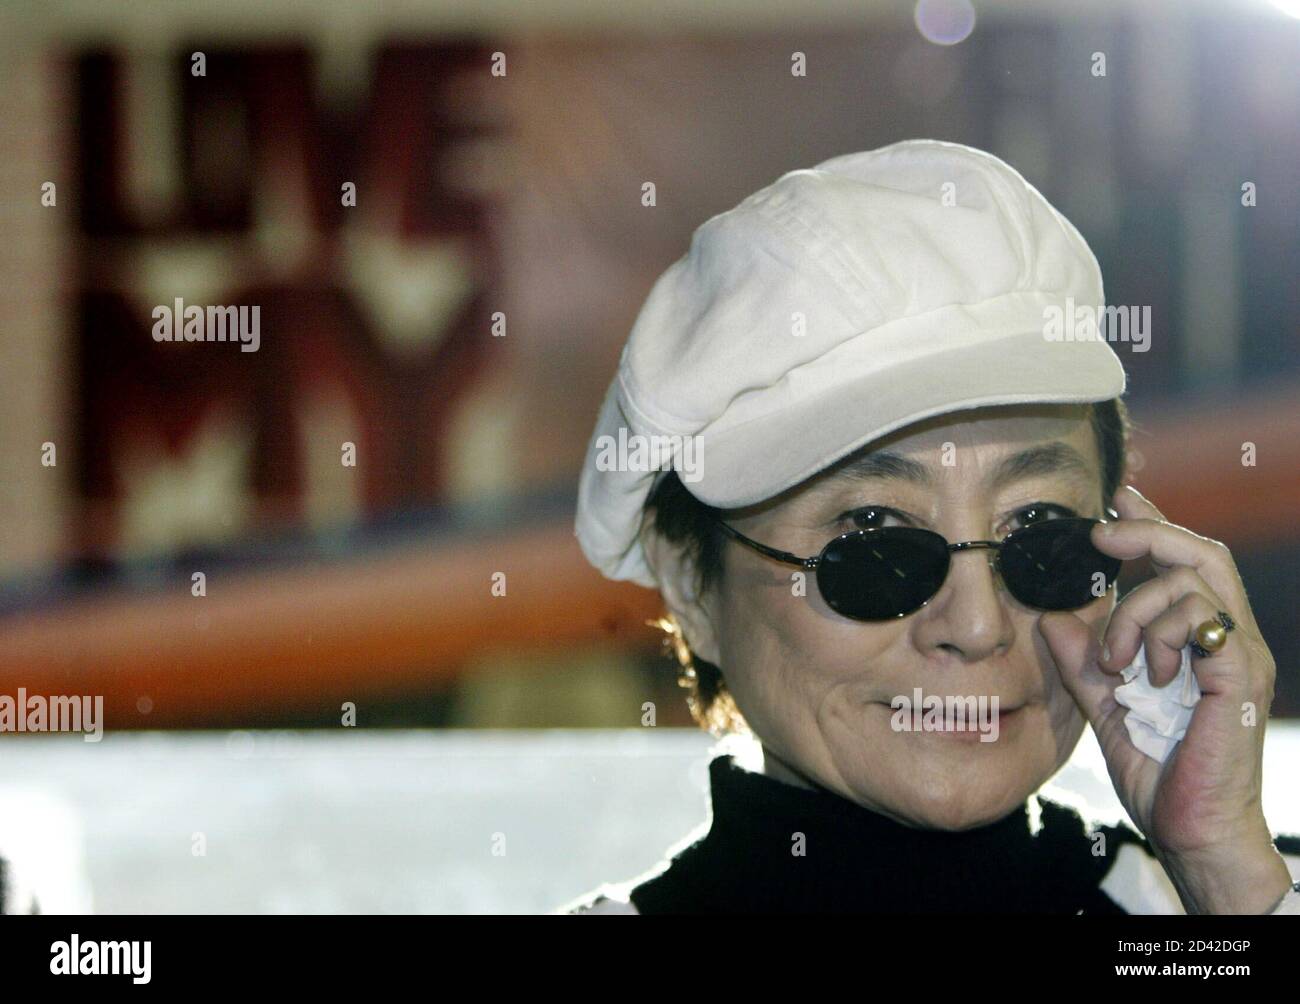 Artist Yoko Ono, the widow of John Lennon, looks over her glasses during  the opening of her exhibition 